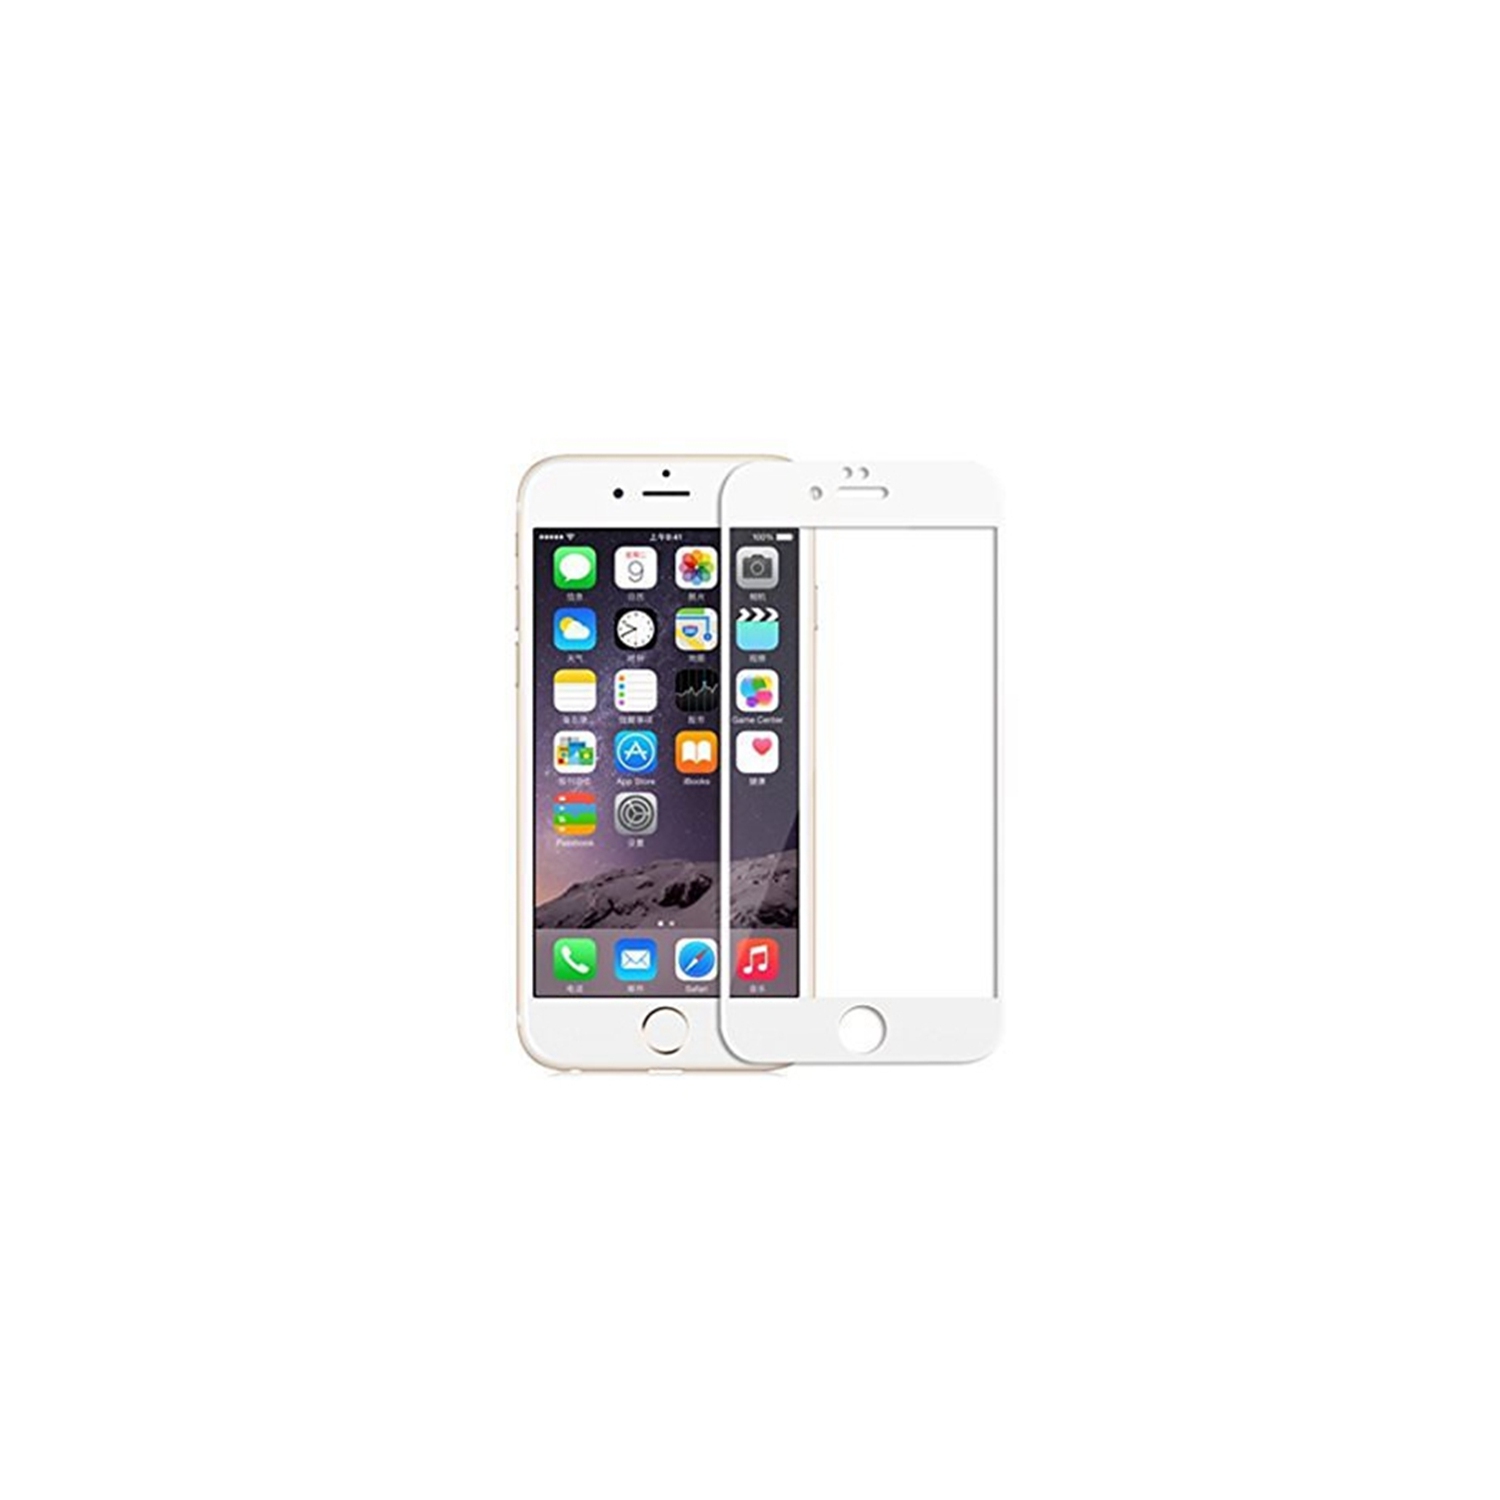 【CSmart】 Case Friendly 3D Curved Full Coverage Tempered Glass Screen Protector for iPhone 6 / iPhone 6S (4.7"), White